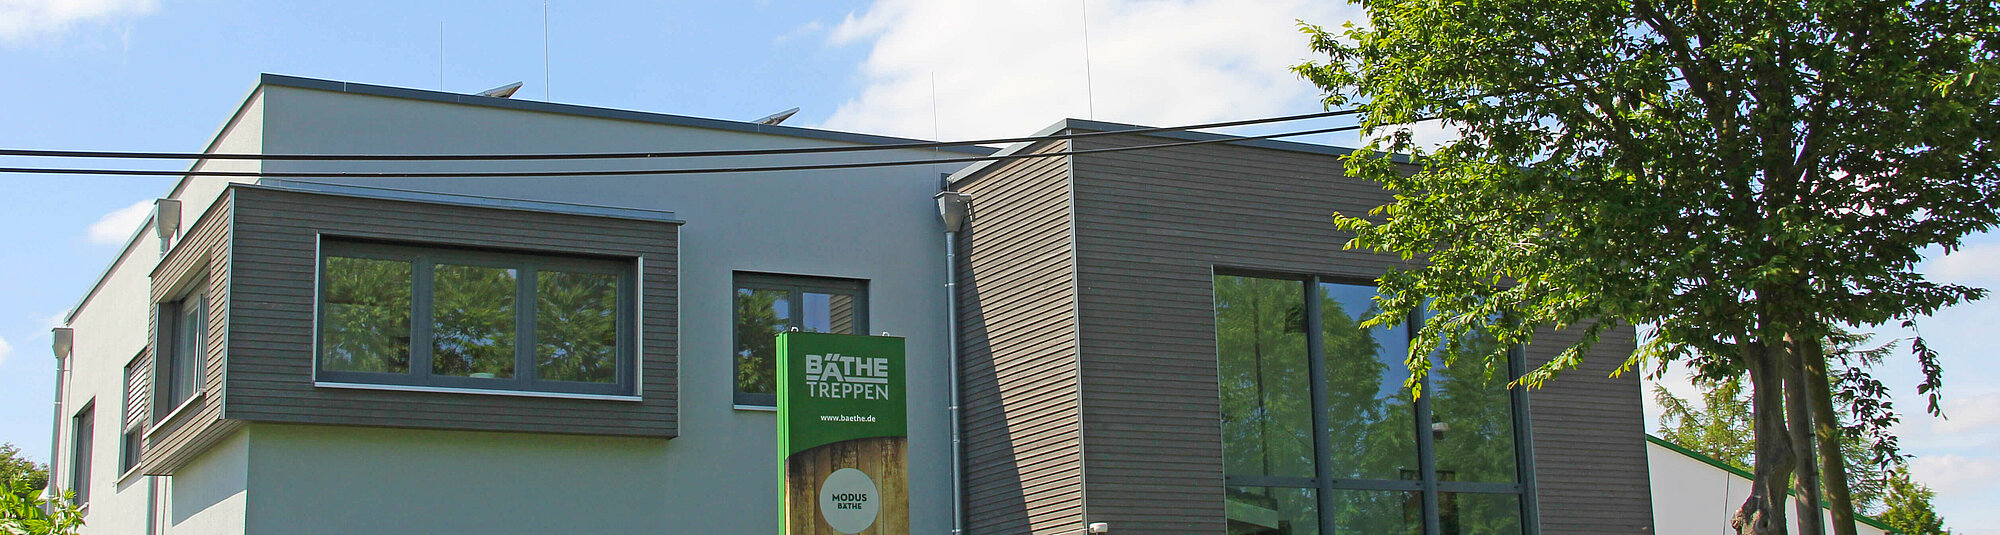 Successful stair manufacturing with Compass Software: Bäthe Treppen GmbH